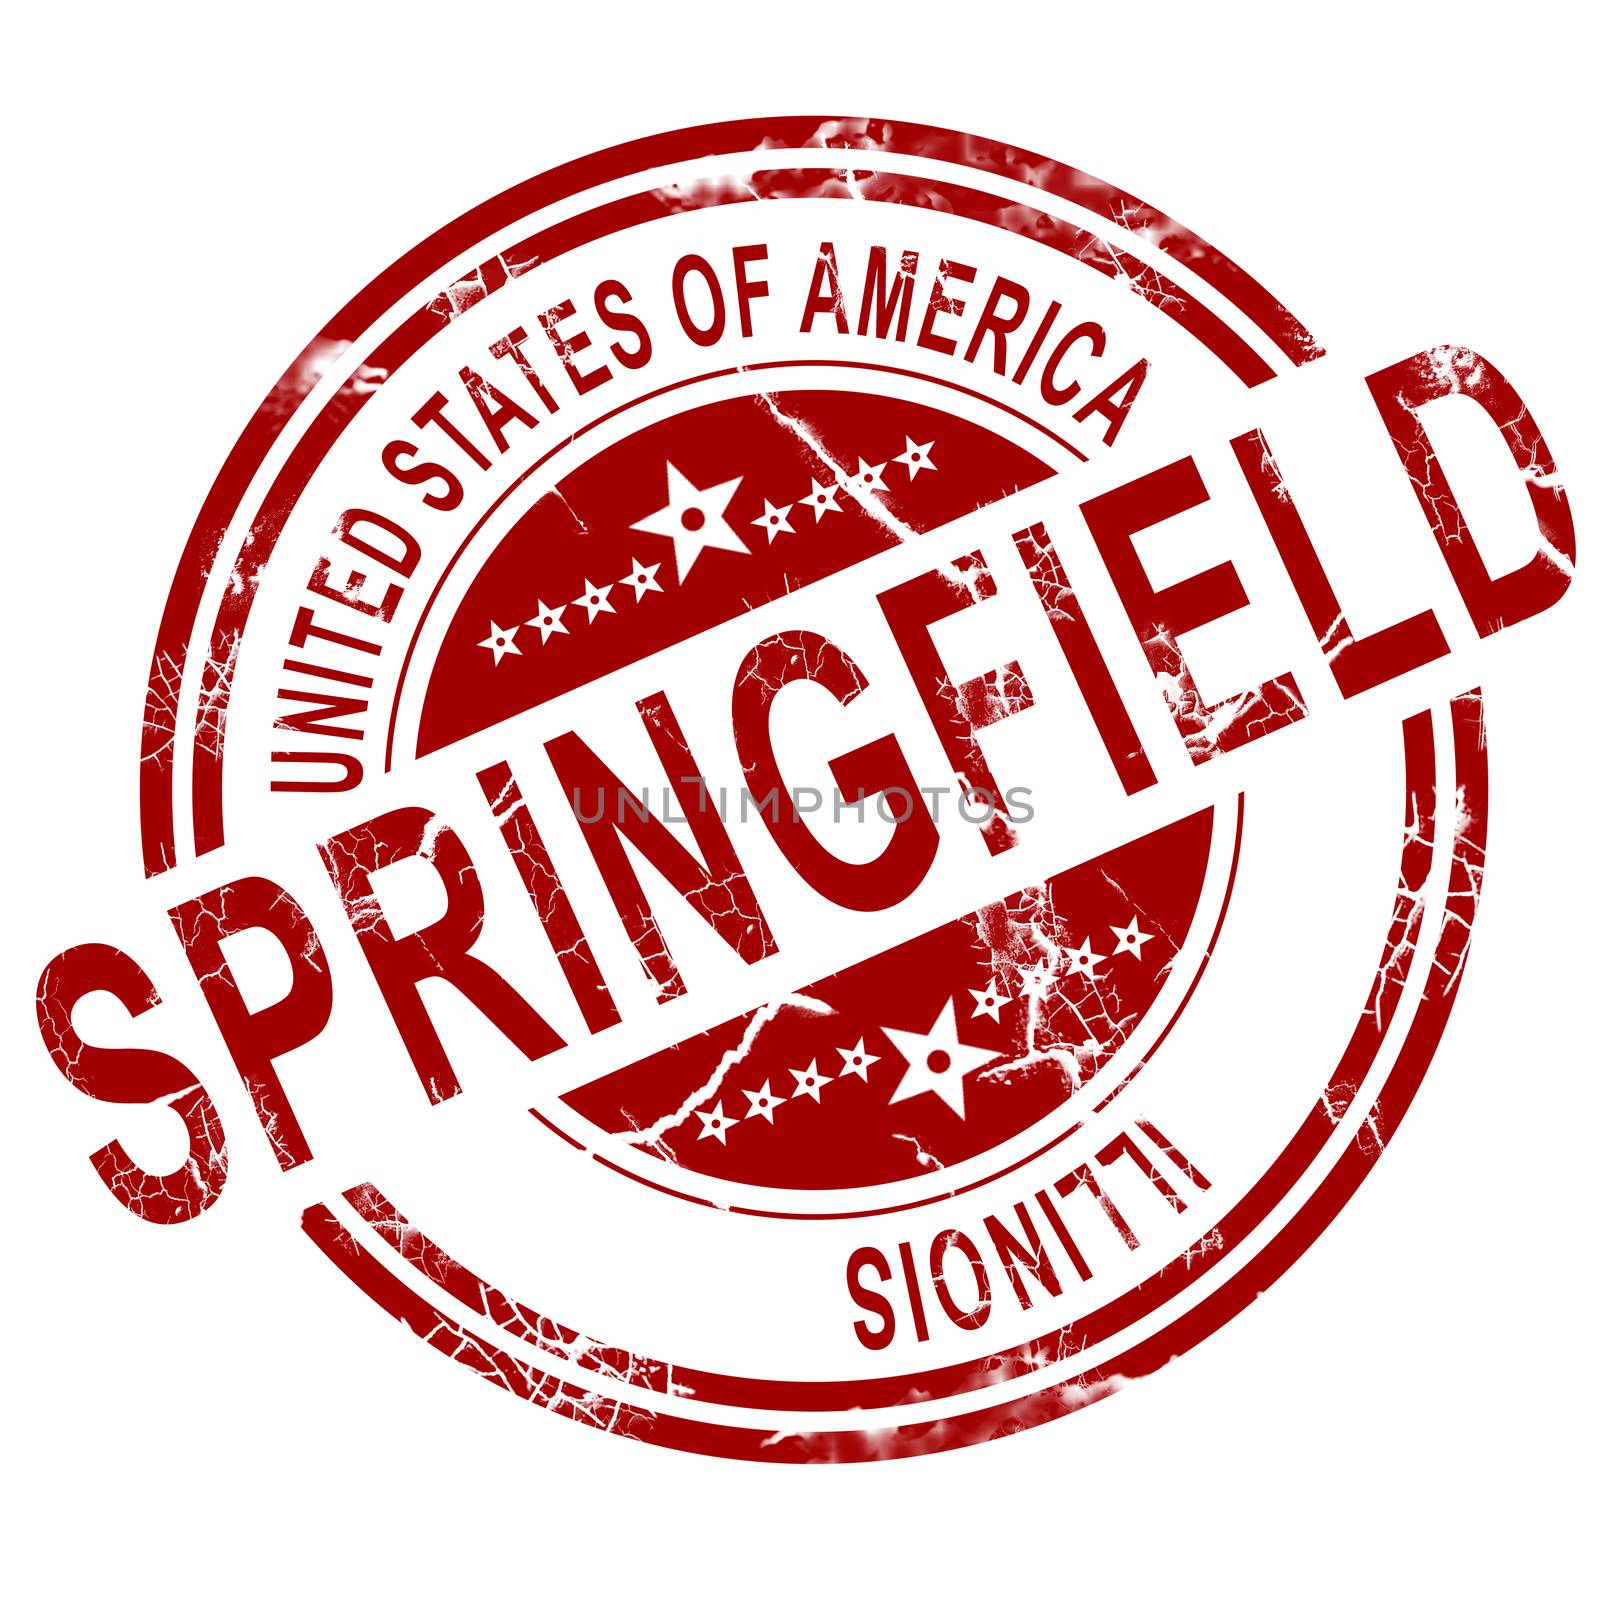 Springfield stamp with white background by tang90246